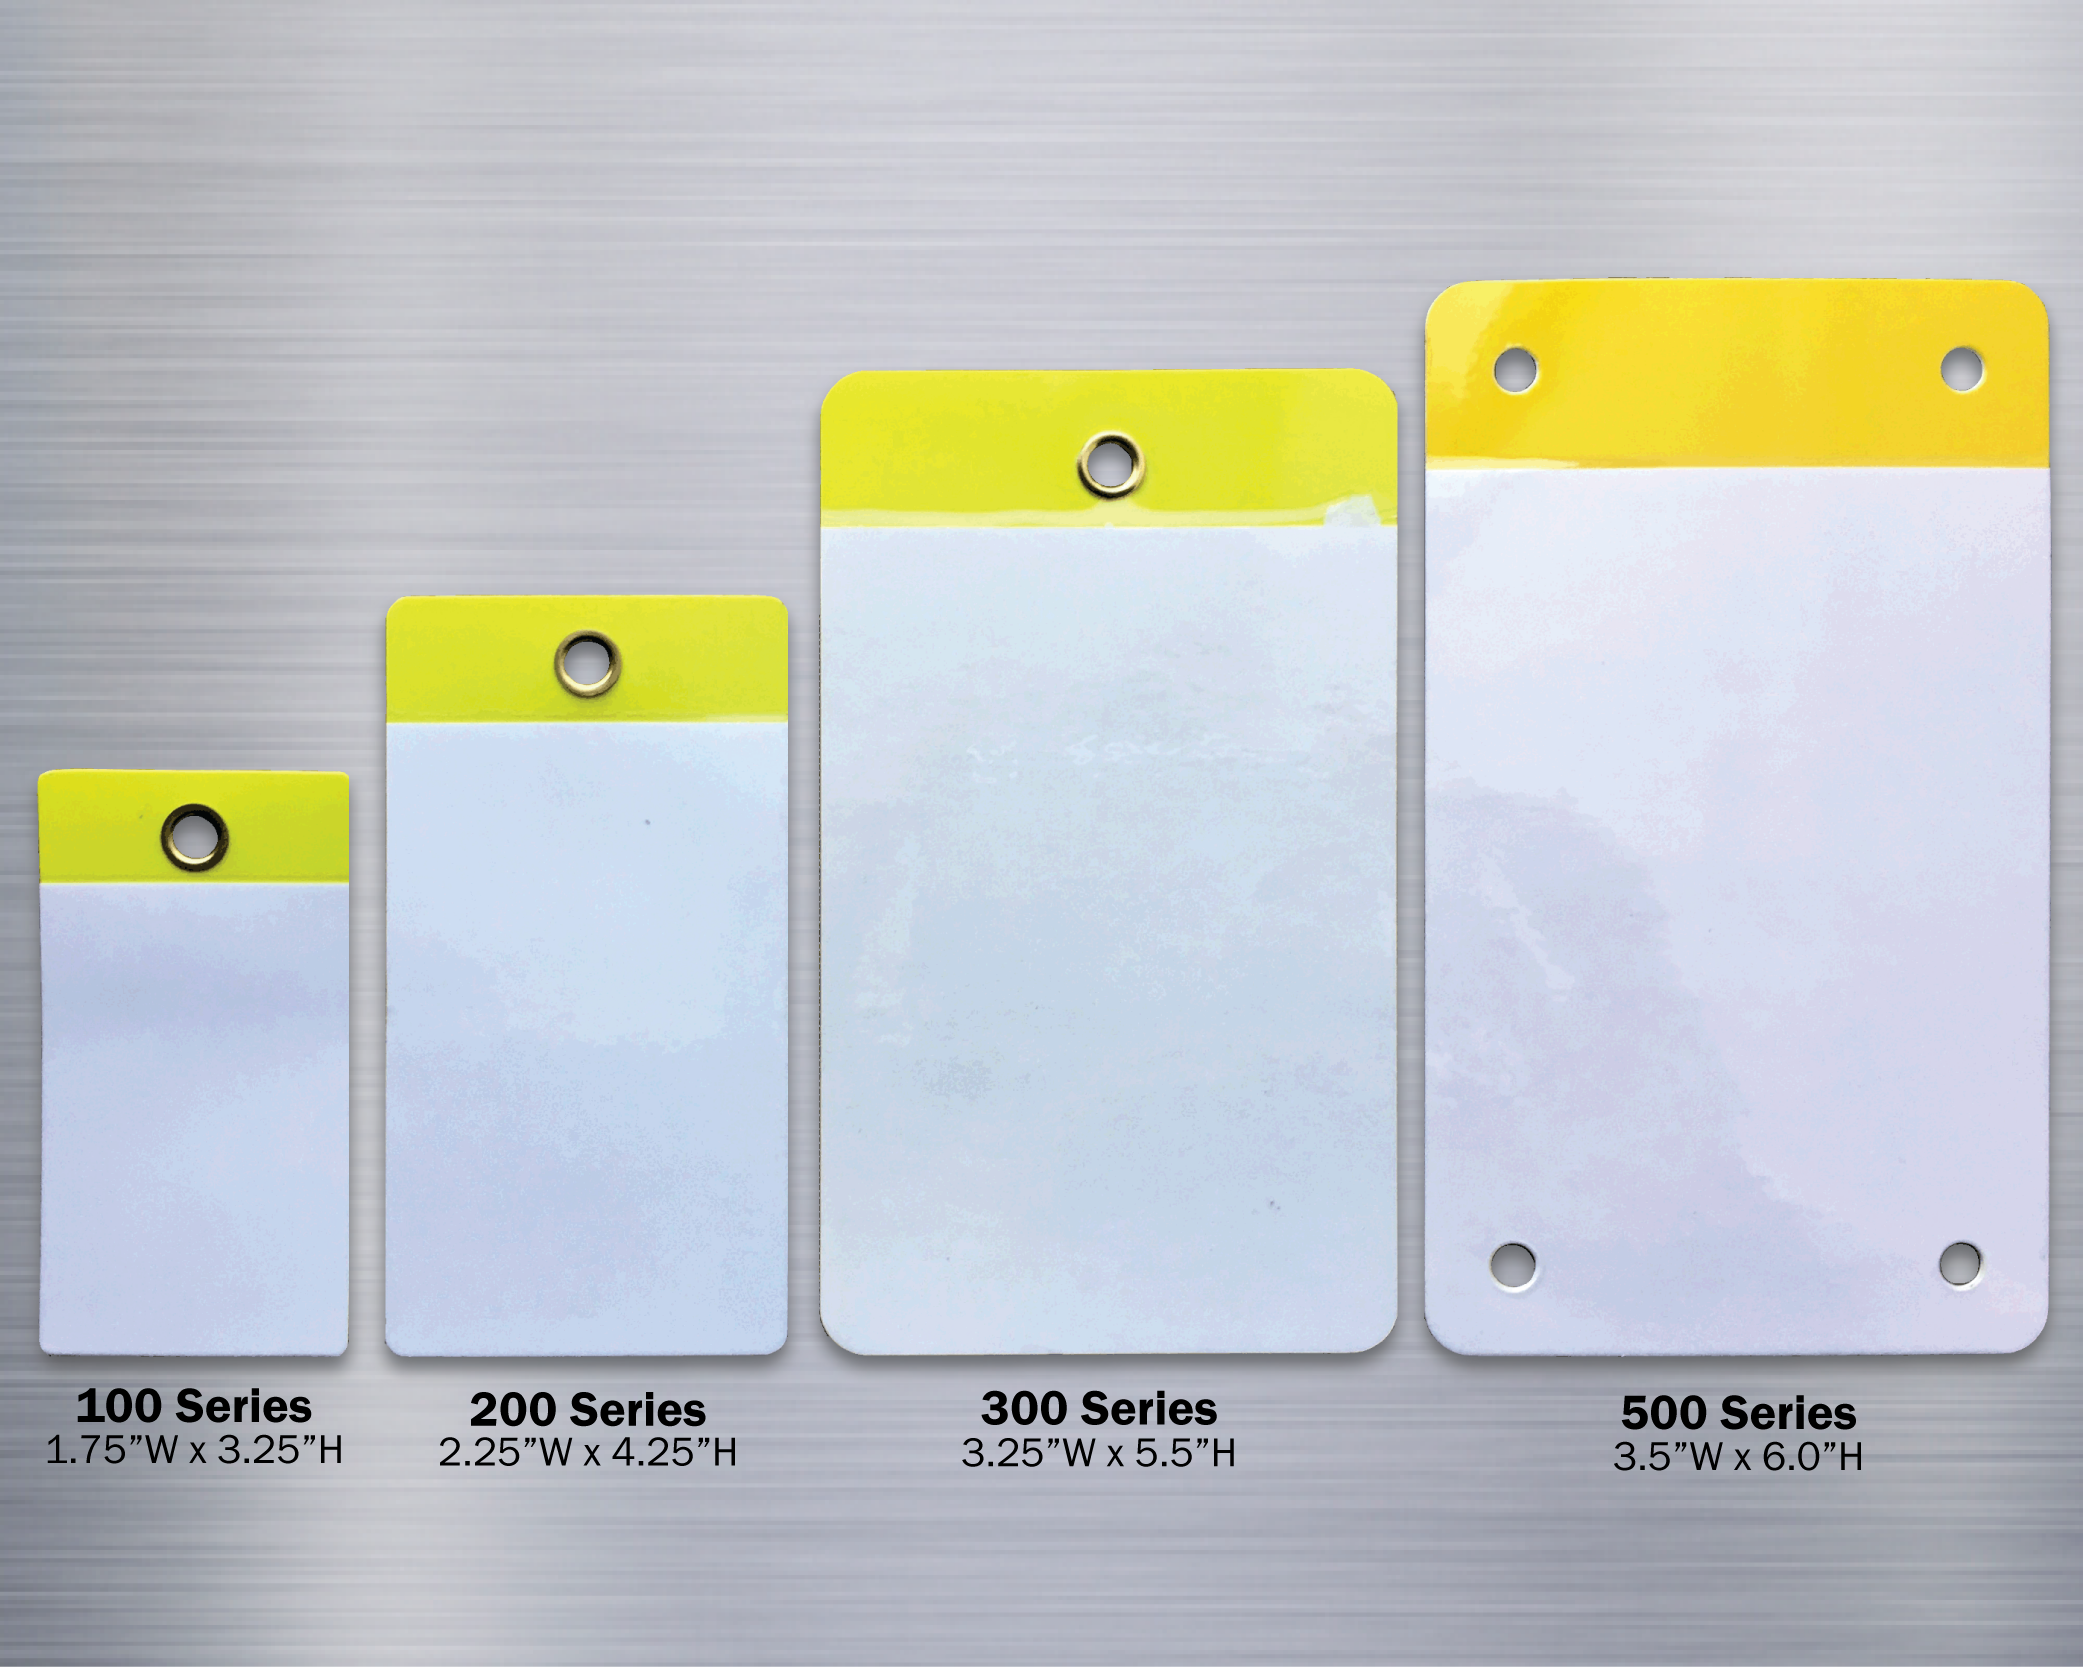 An image of four different sizes of blank, self-laminating tags typically used for identifying inventory management. Tags shown are yellow and rectangular with rounded corners and eyelets.